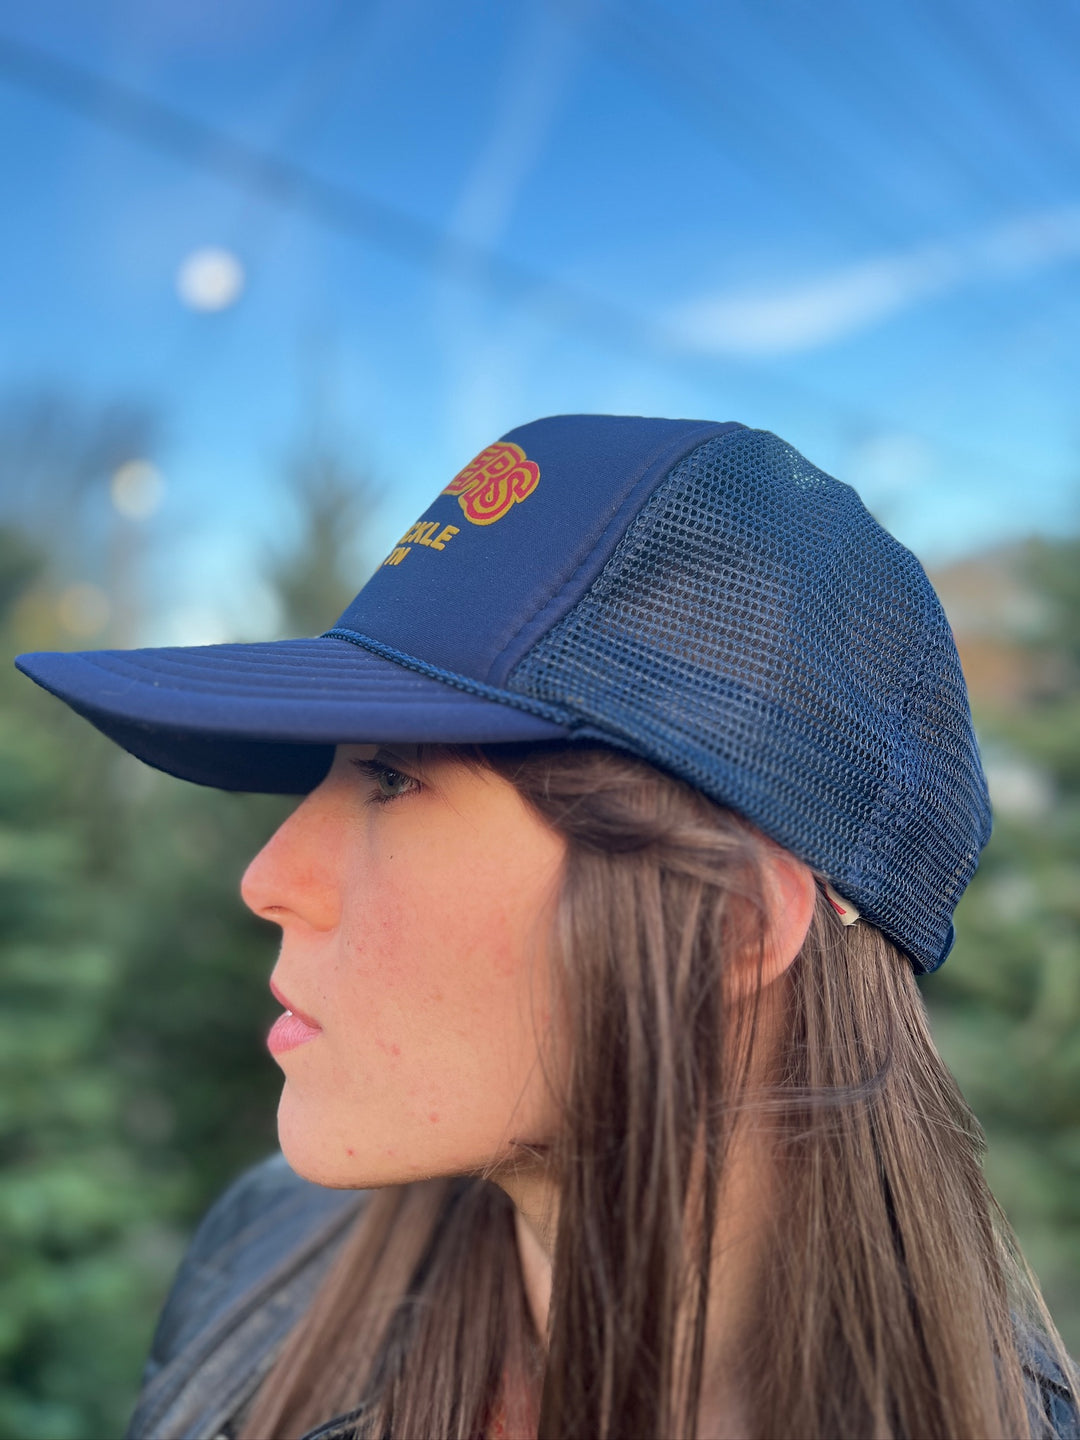 Vintage Blue Trucker Hat: Hookers Bait and Tackle